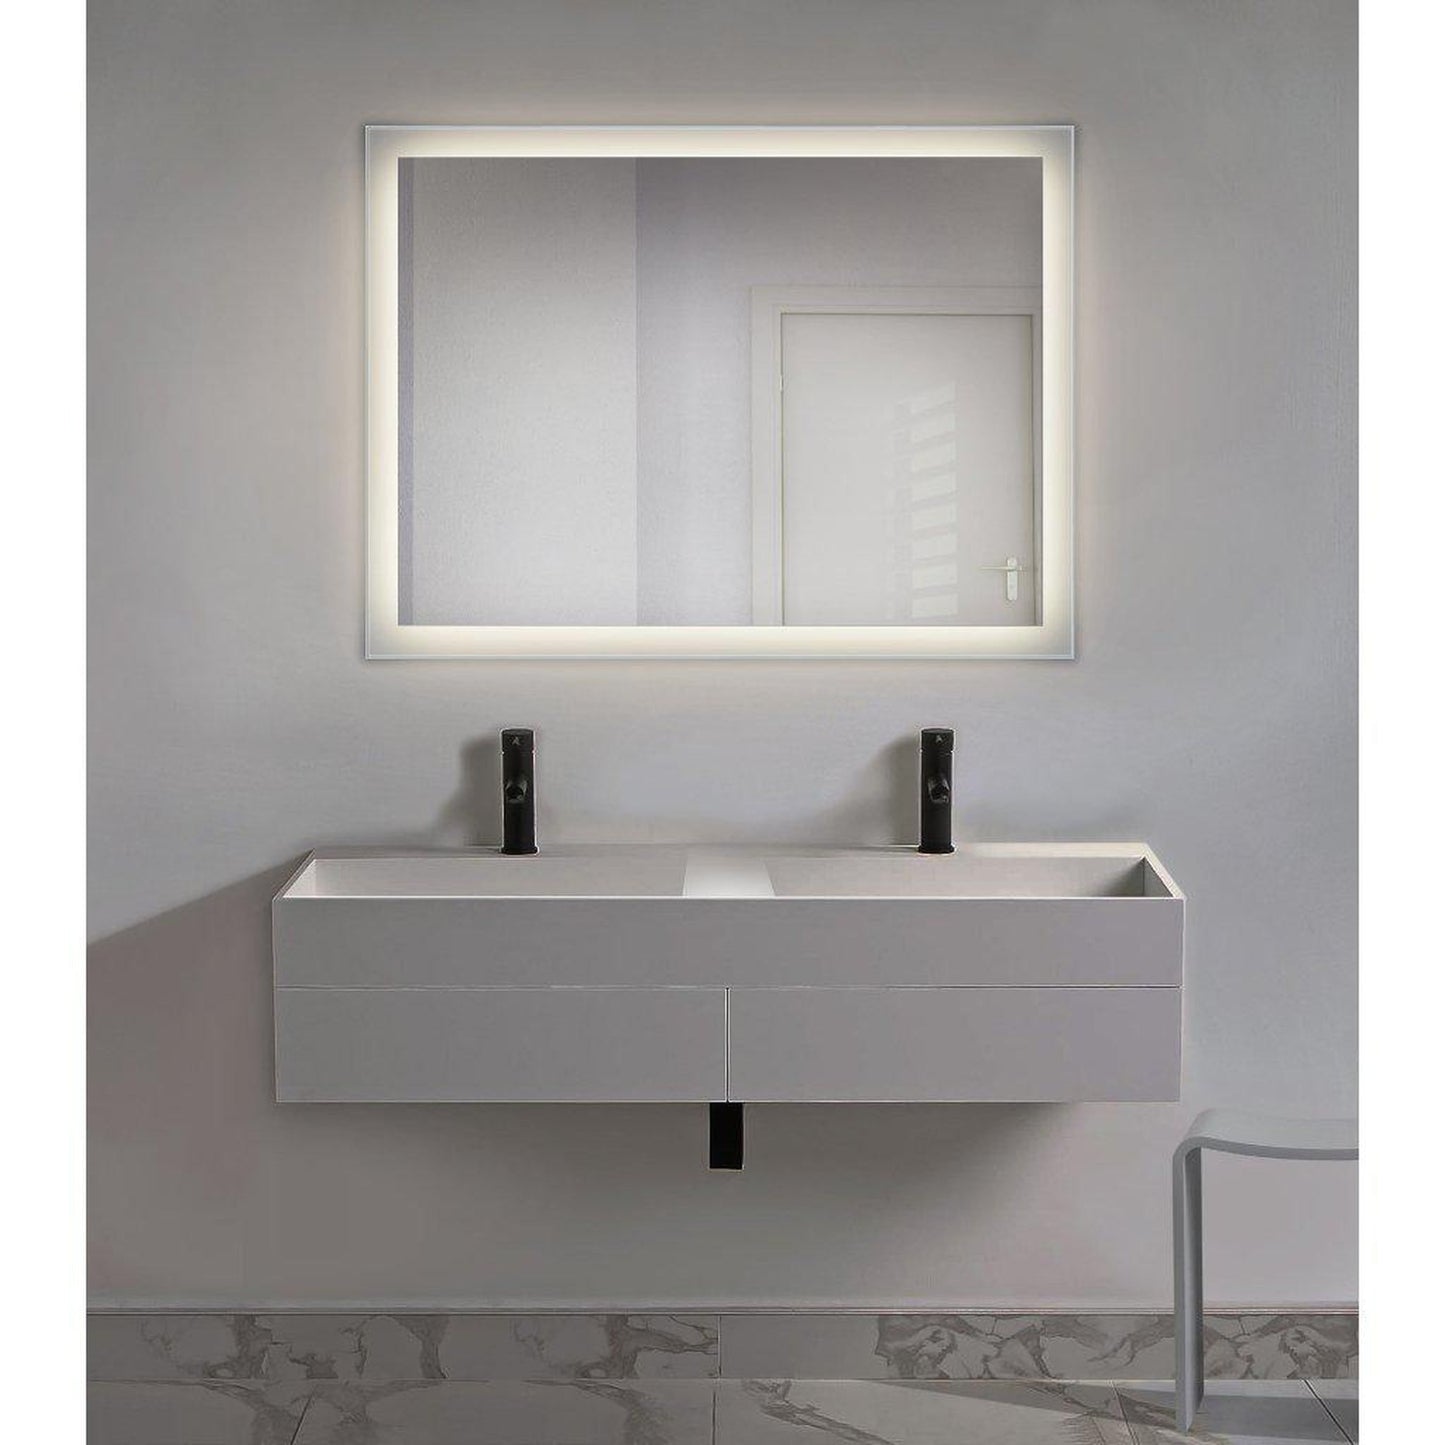 Krugg Reflections Stella 48" x 36" 5000K Rectangular Wall-Mounted Silver-Backed LED Bathroom Vanity Mirror With Built-in Defogger and Dimmer